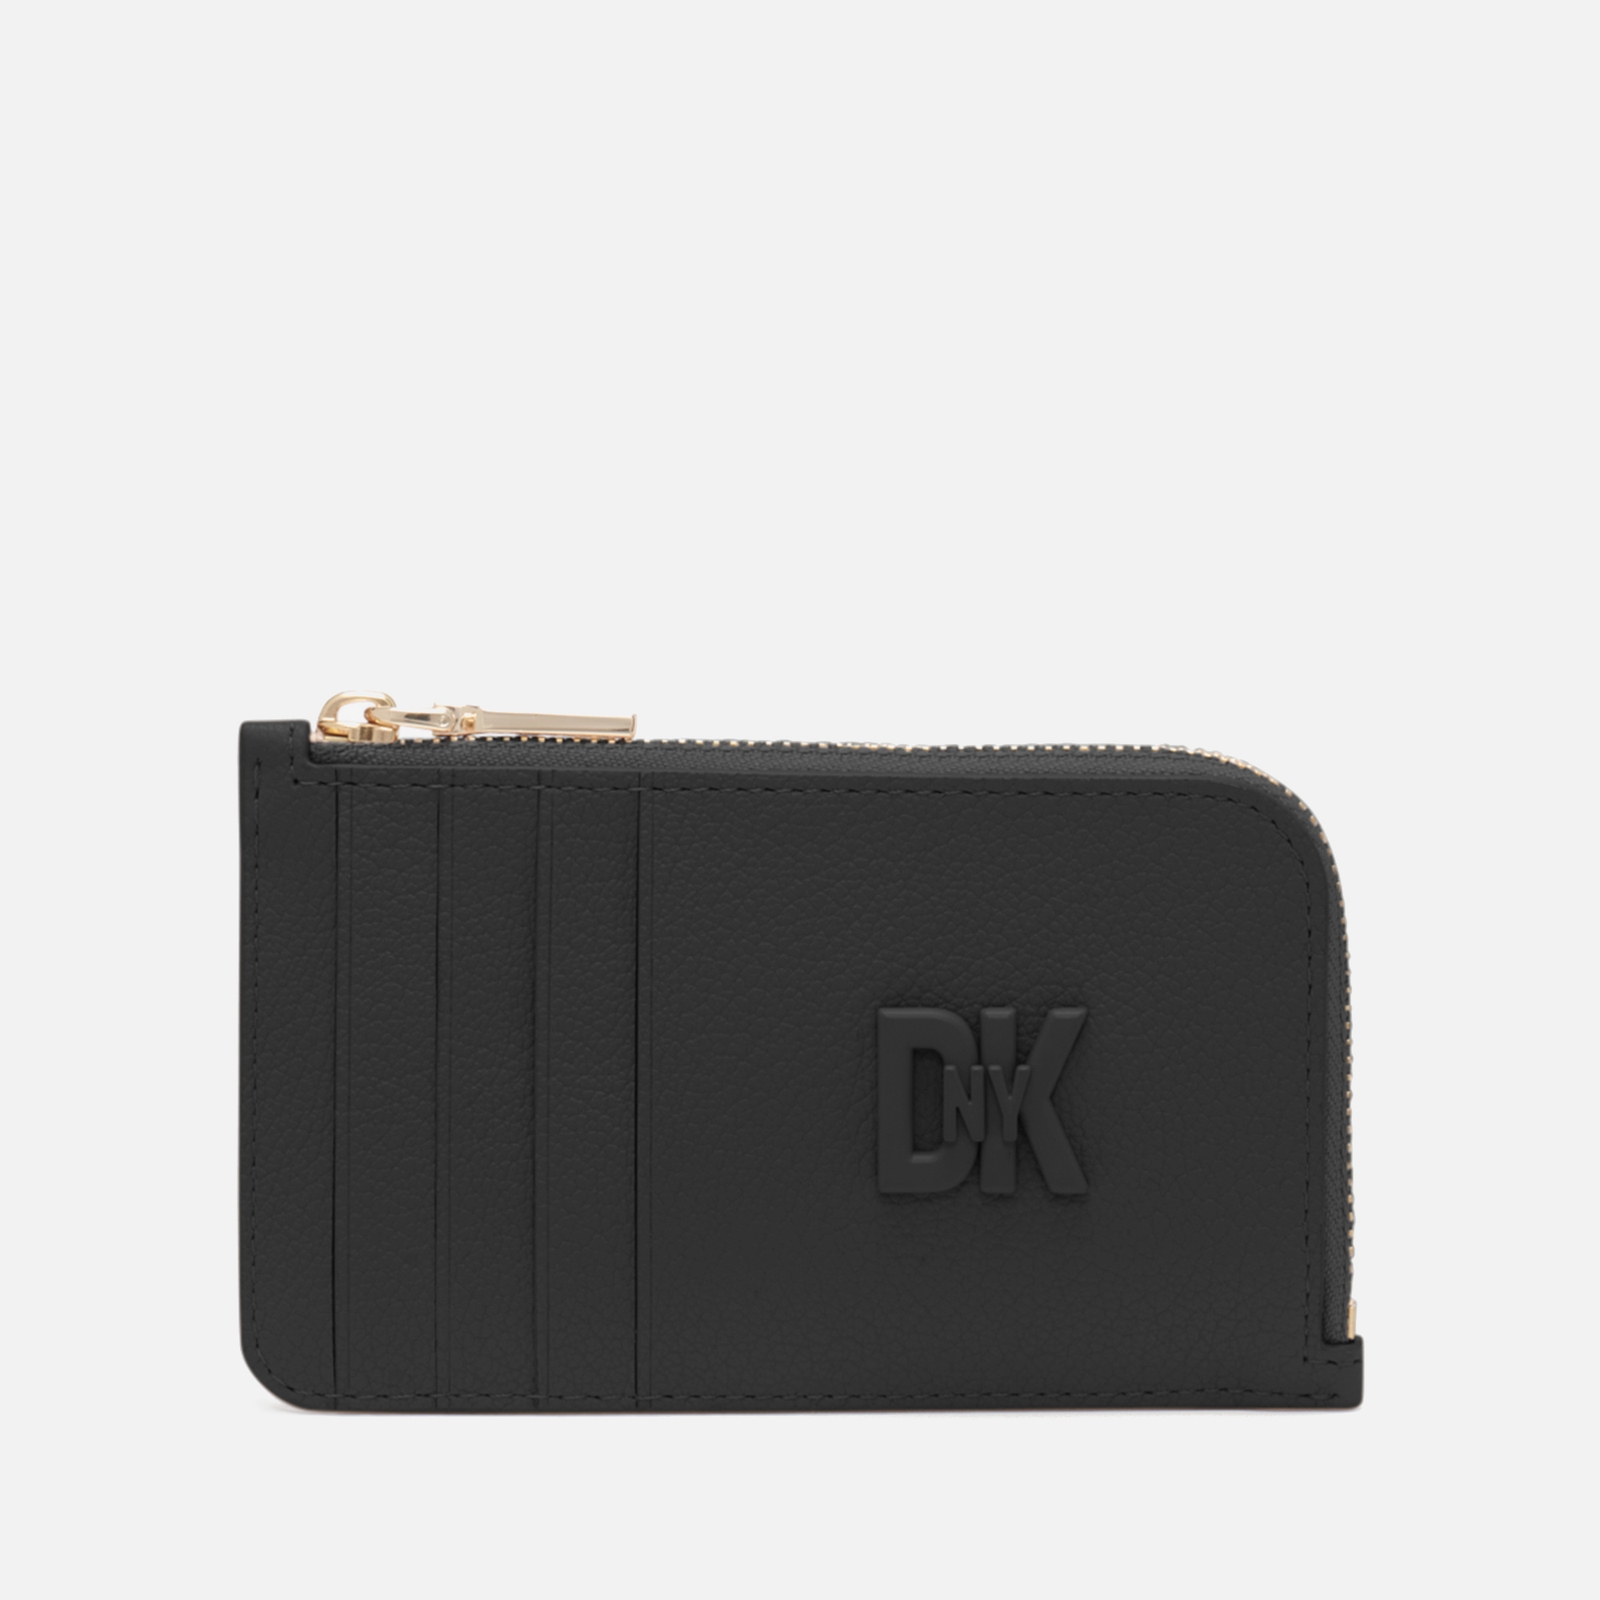 DKNY Seventh Avenue Leather Card Holder